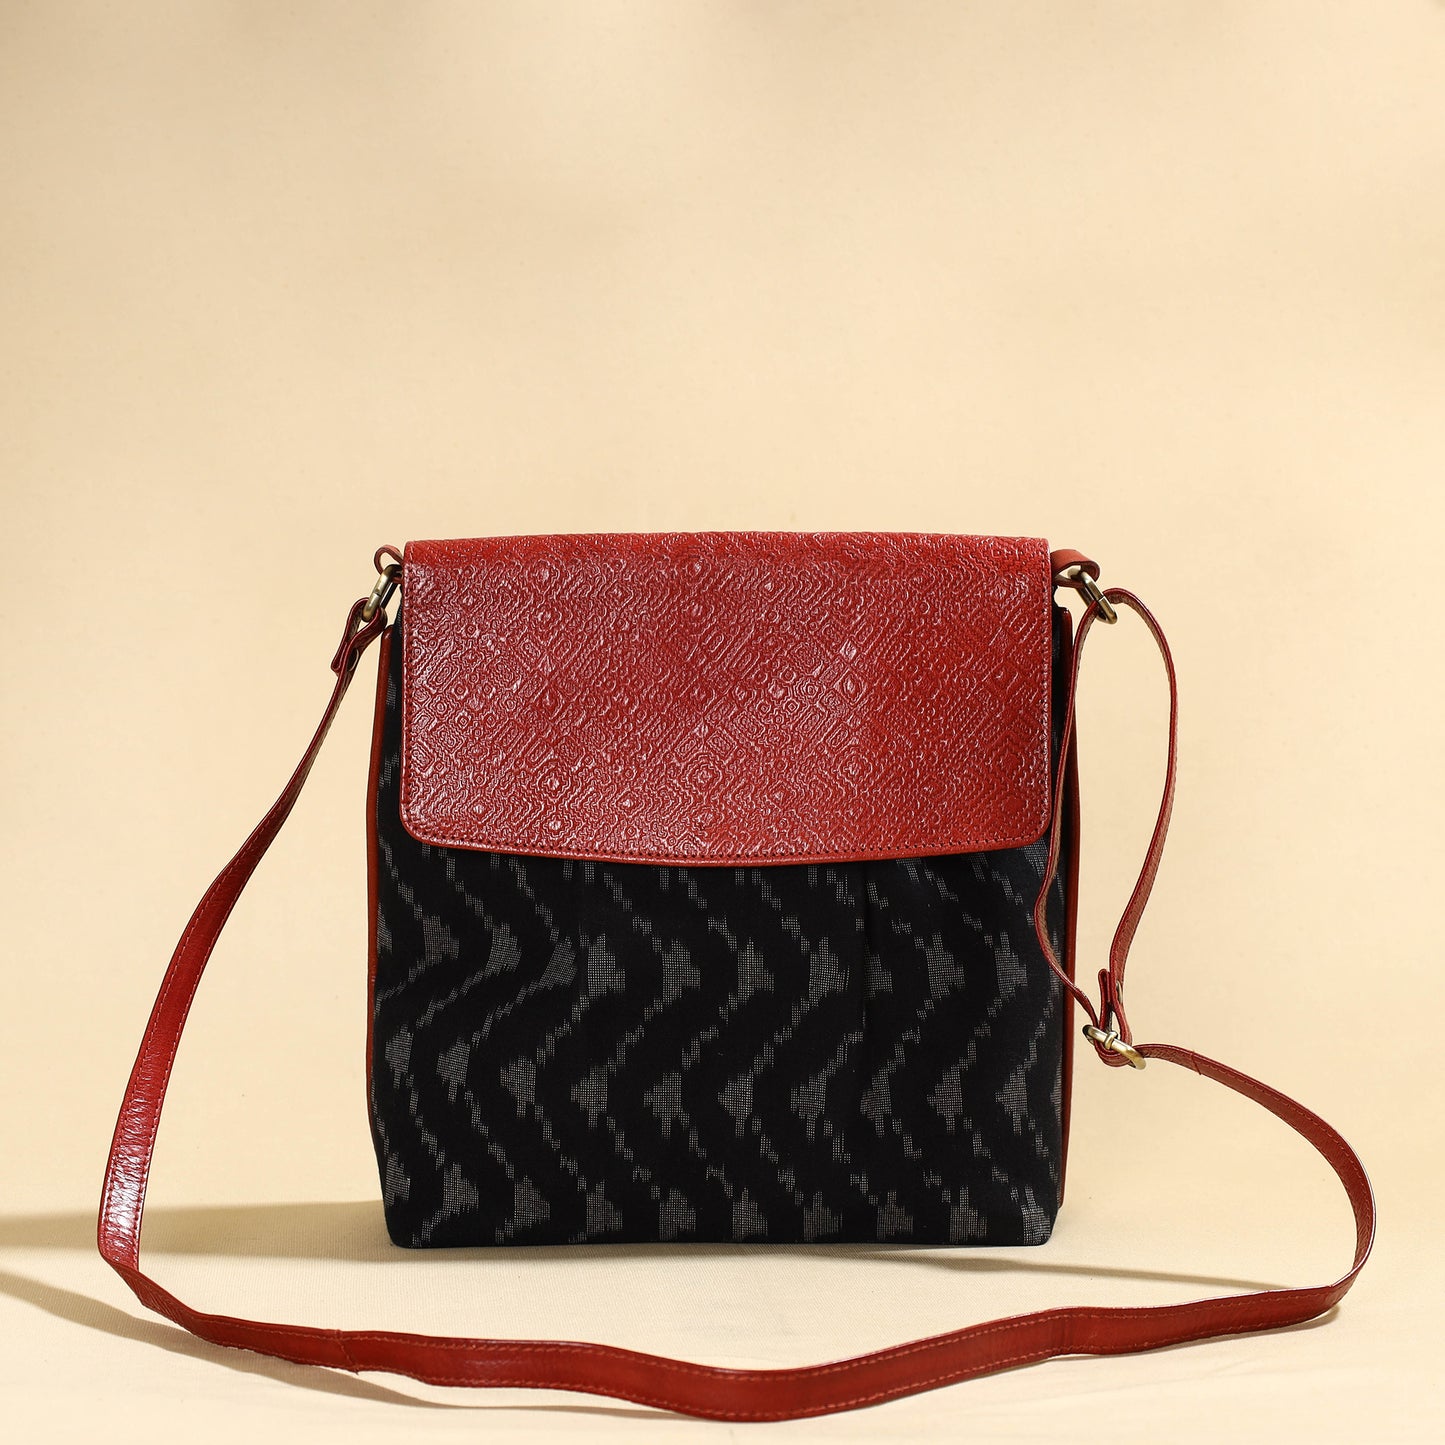 Black - Handcrafted Ikat Fabric Sling Bag with Embossed Leather Flap